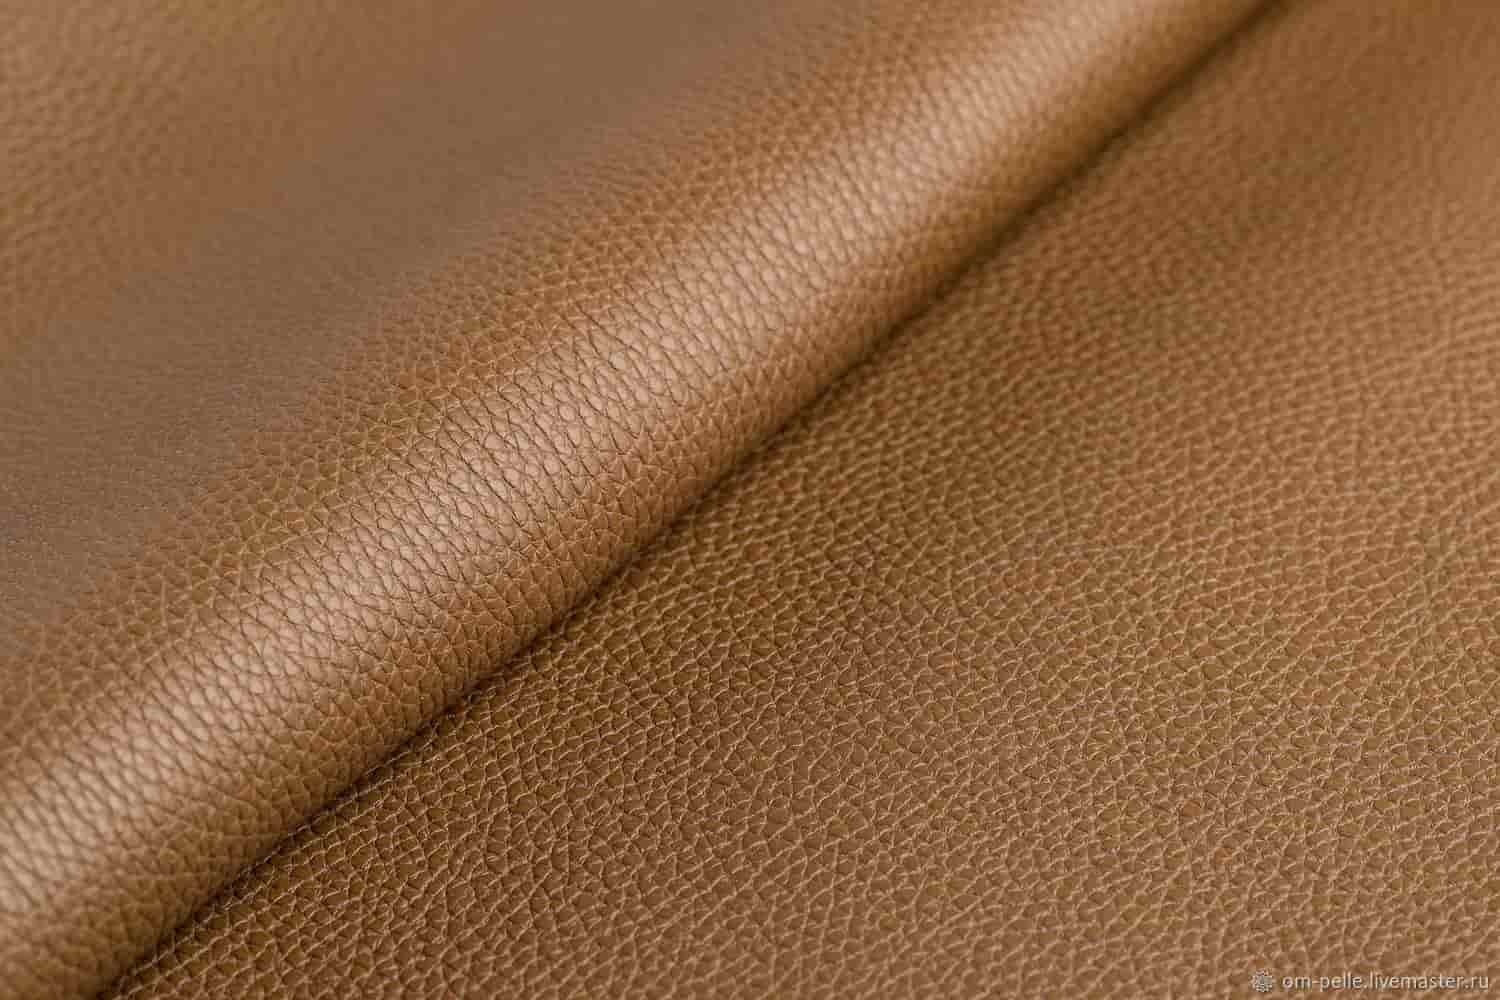 difference between calfskin and cowhide leather